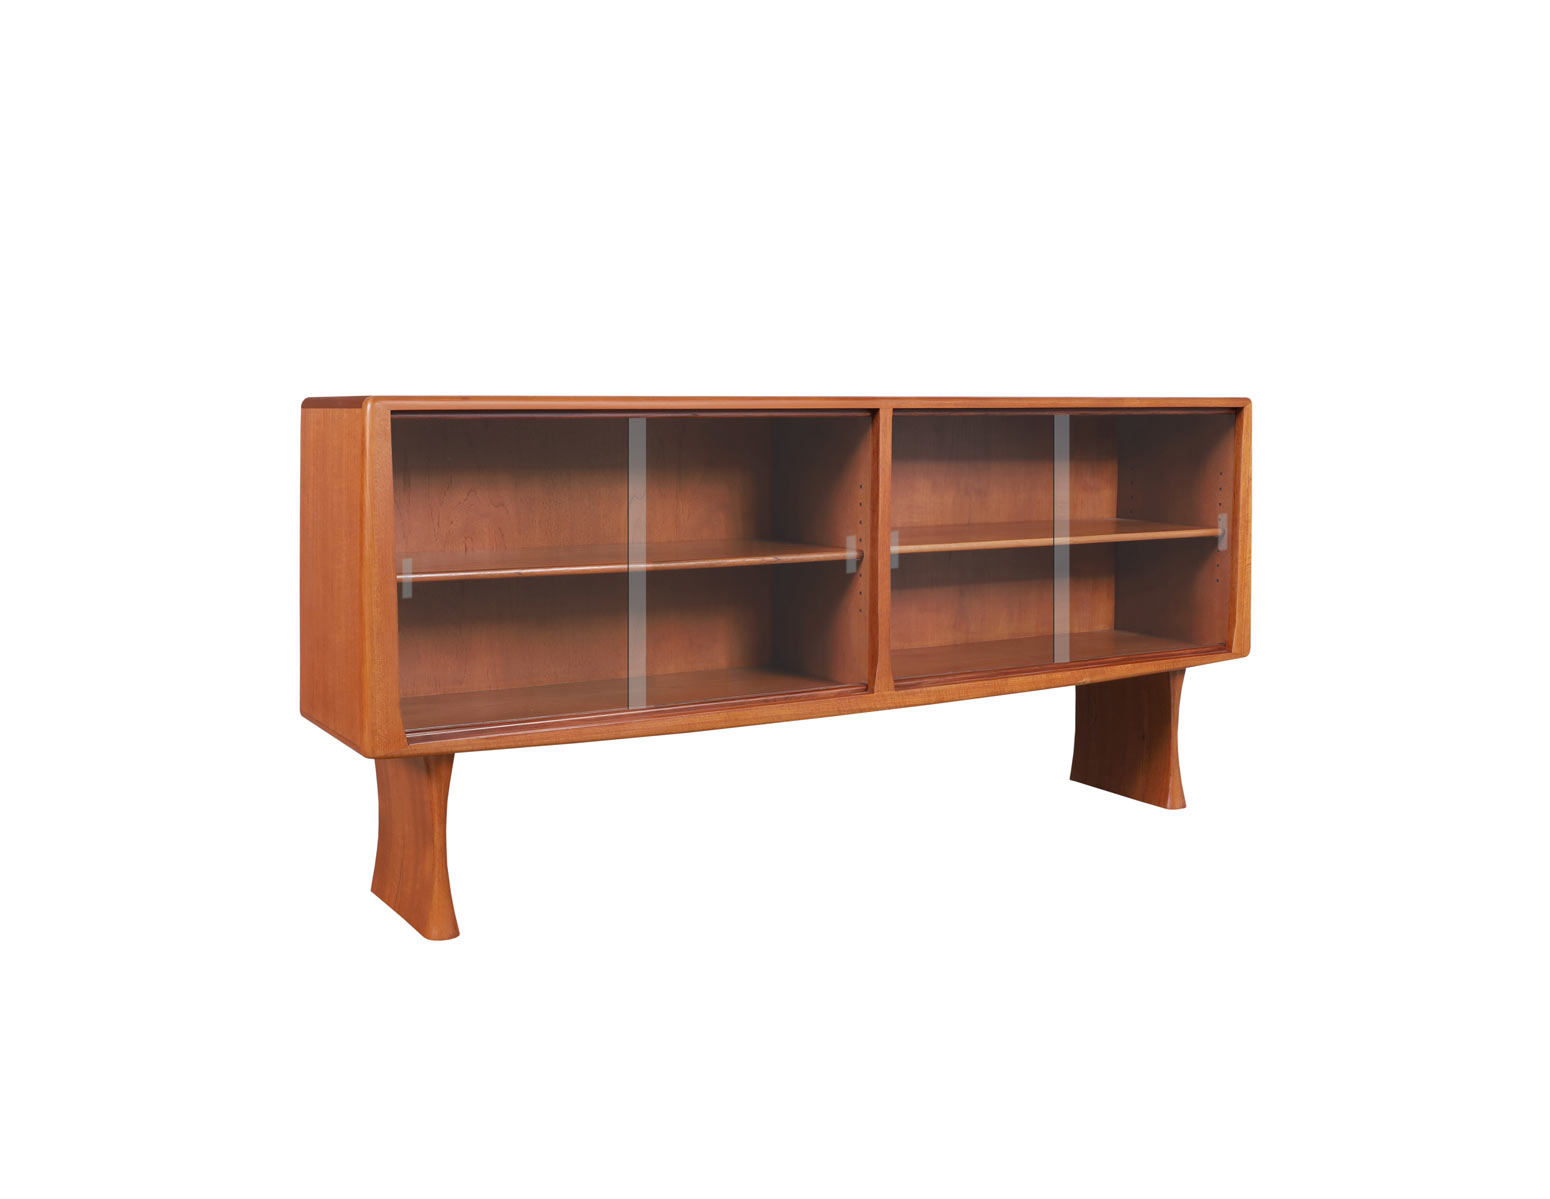 Danish Modern Teak Credenza or Bookcase with Glass Doors by Hoss Wulff